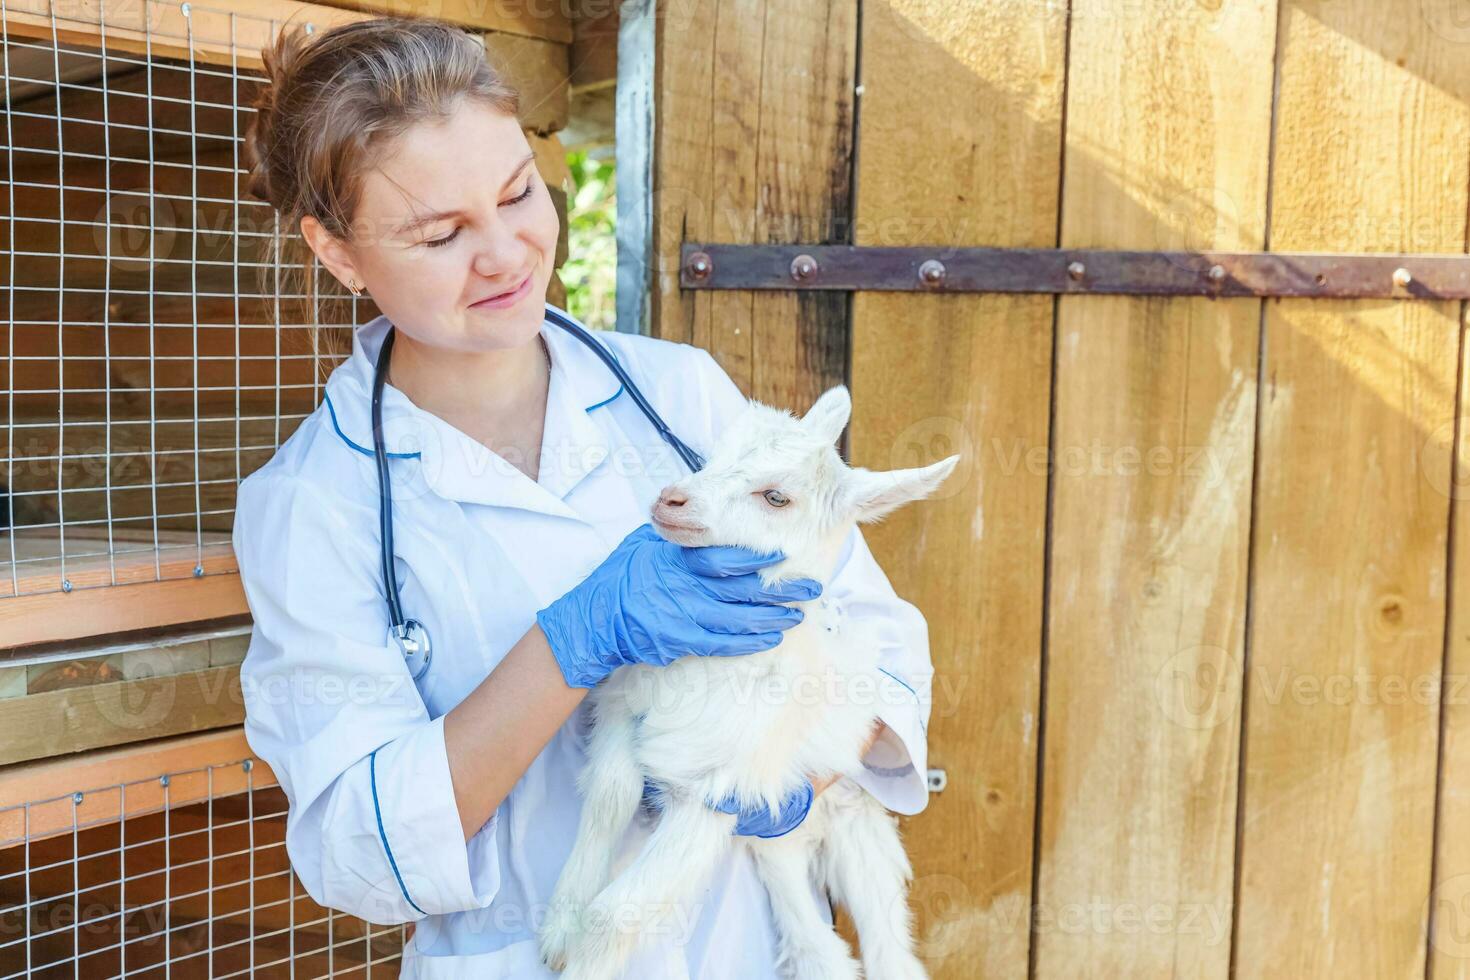 Young veterinarian woman with stethoscope holding and examining goat kid on ranch background. Young goatling in vet hands for check up in natural eco farm. Modern animal livestock, ecological farming. photo